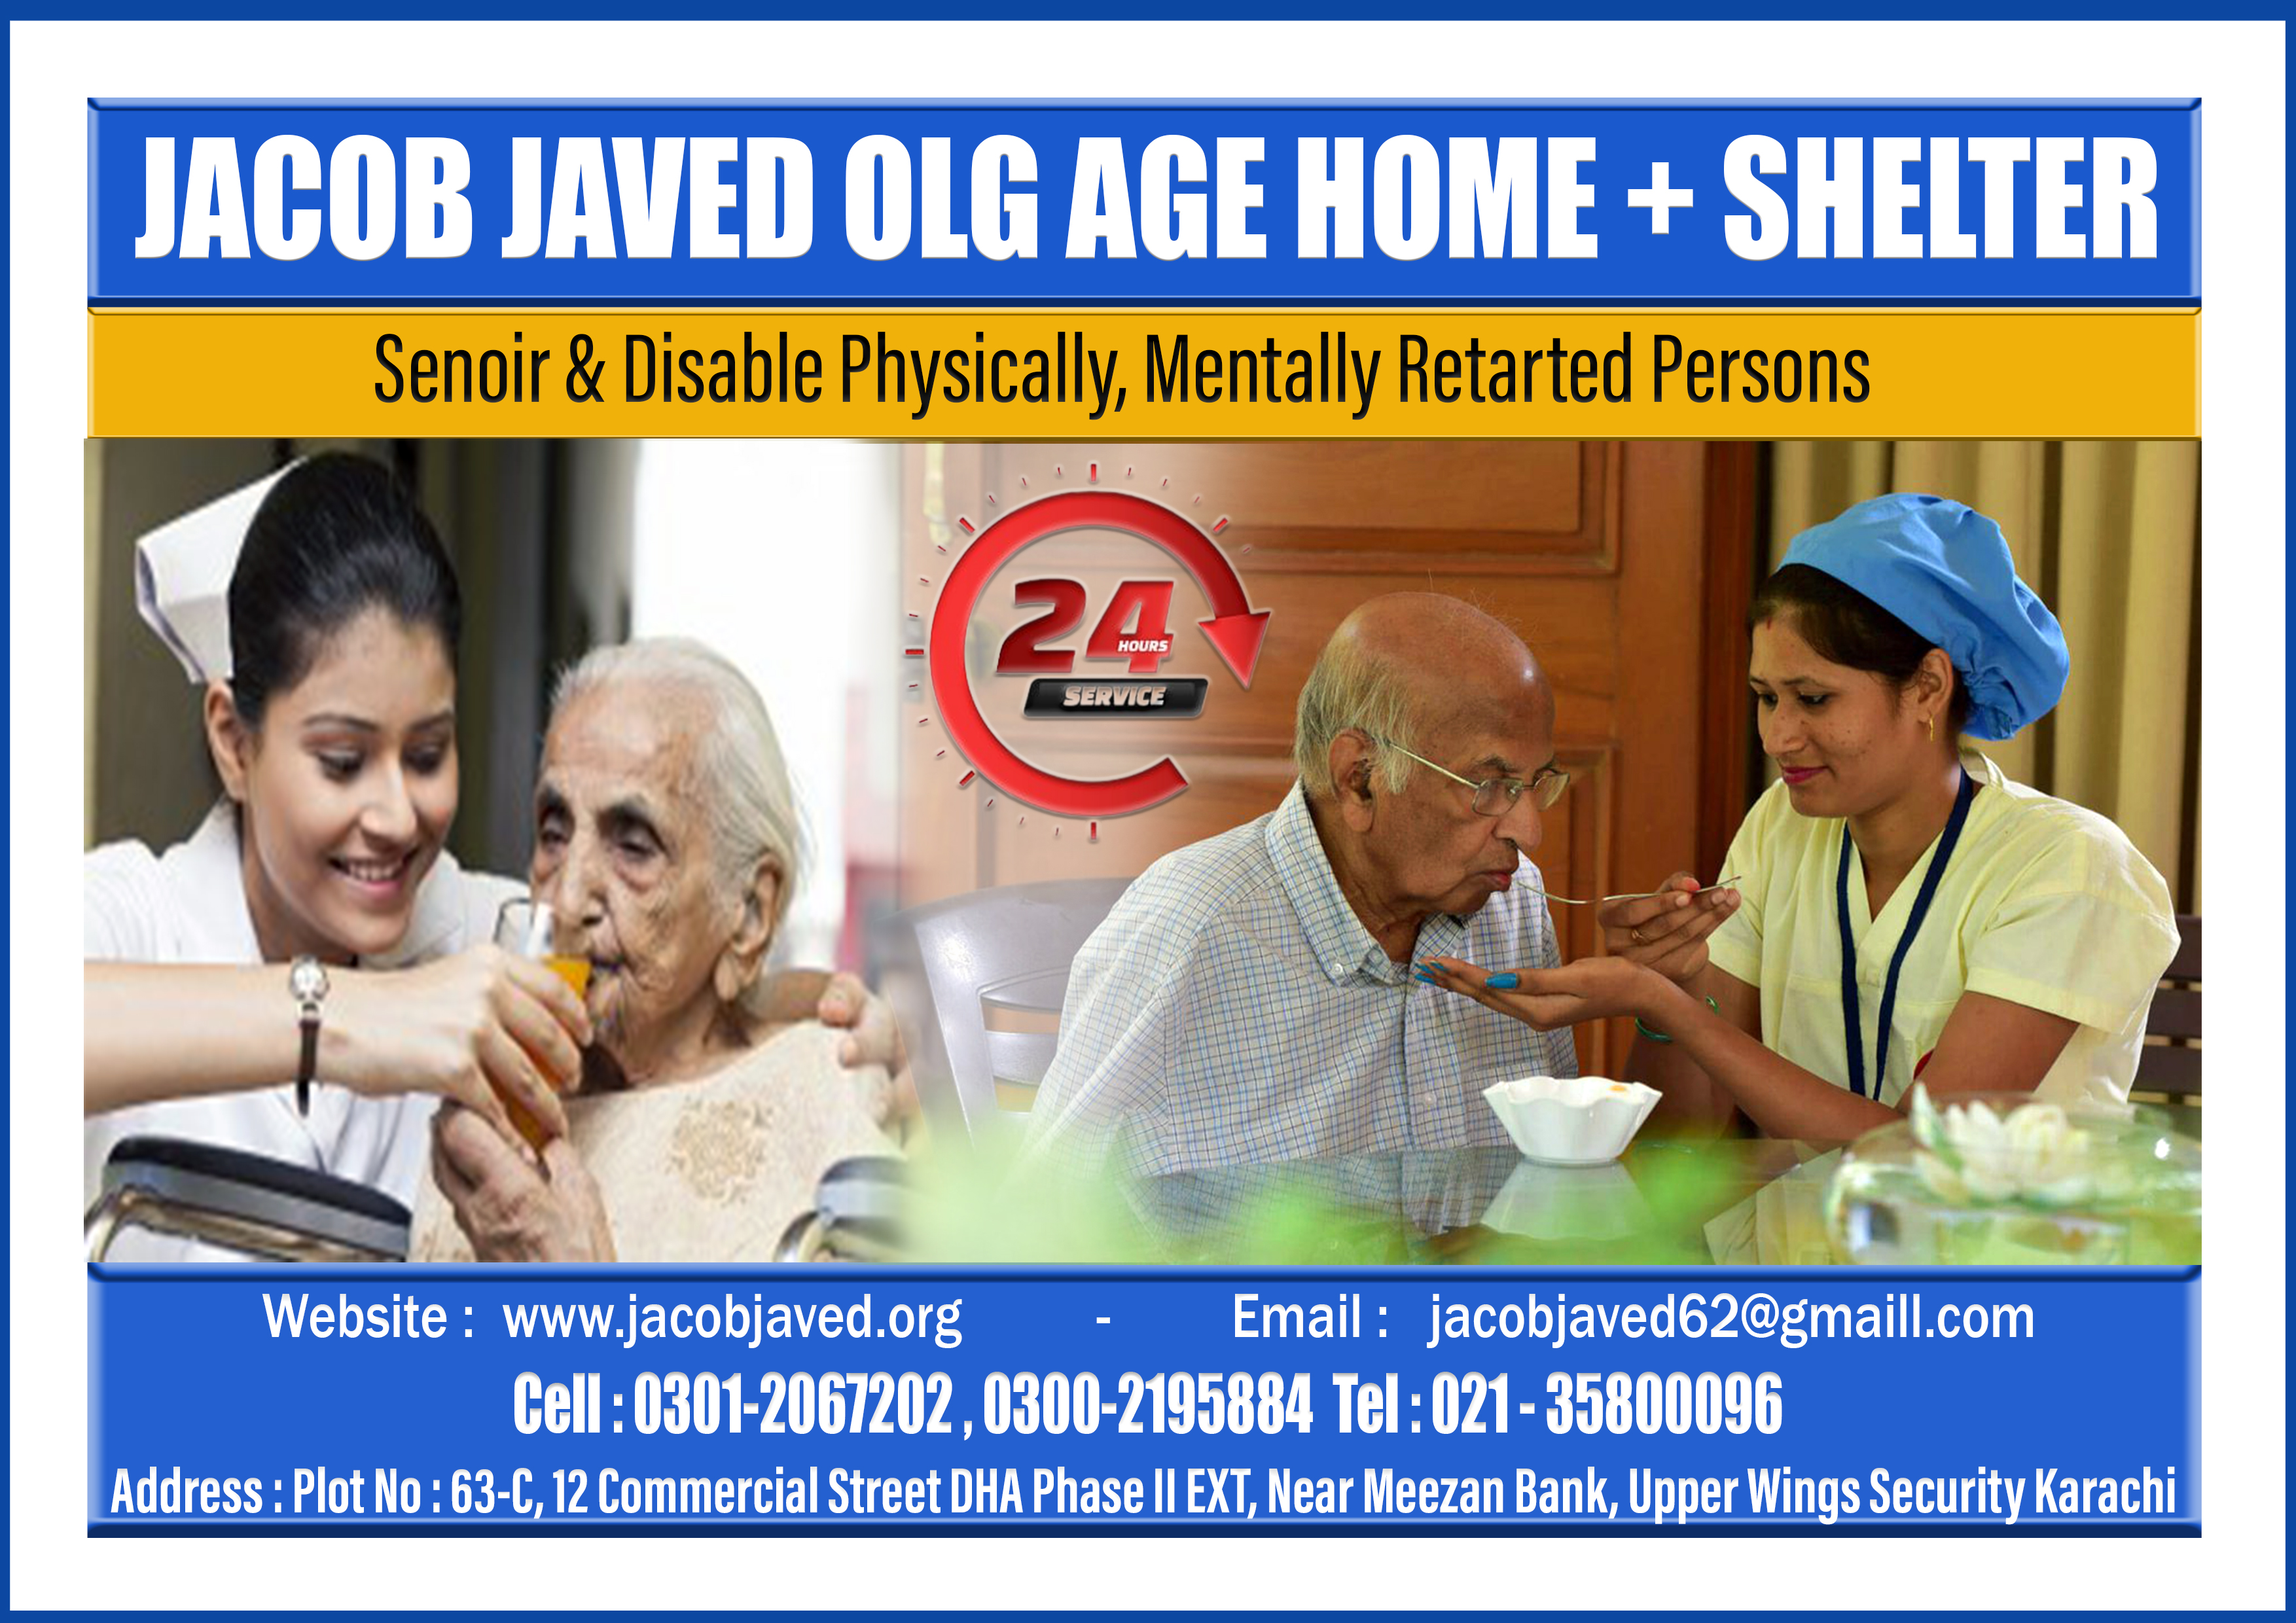 Jacob Javed Old Age Home + Shelter